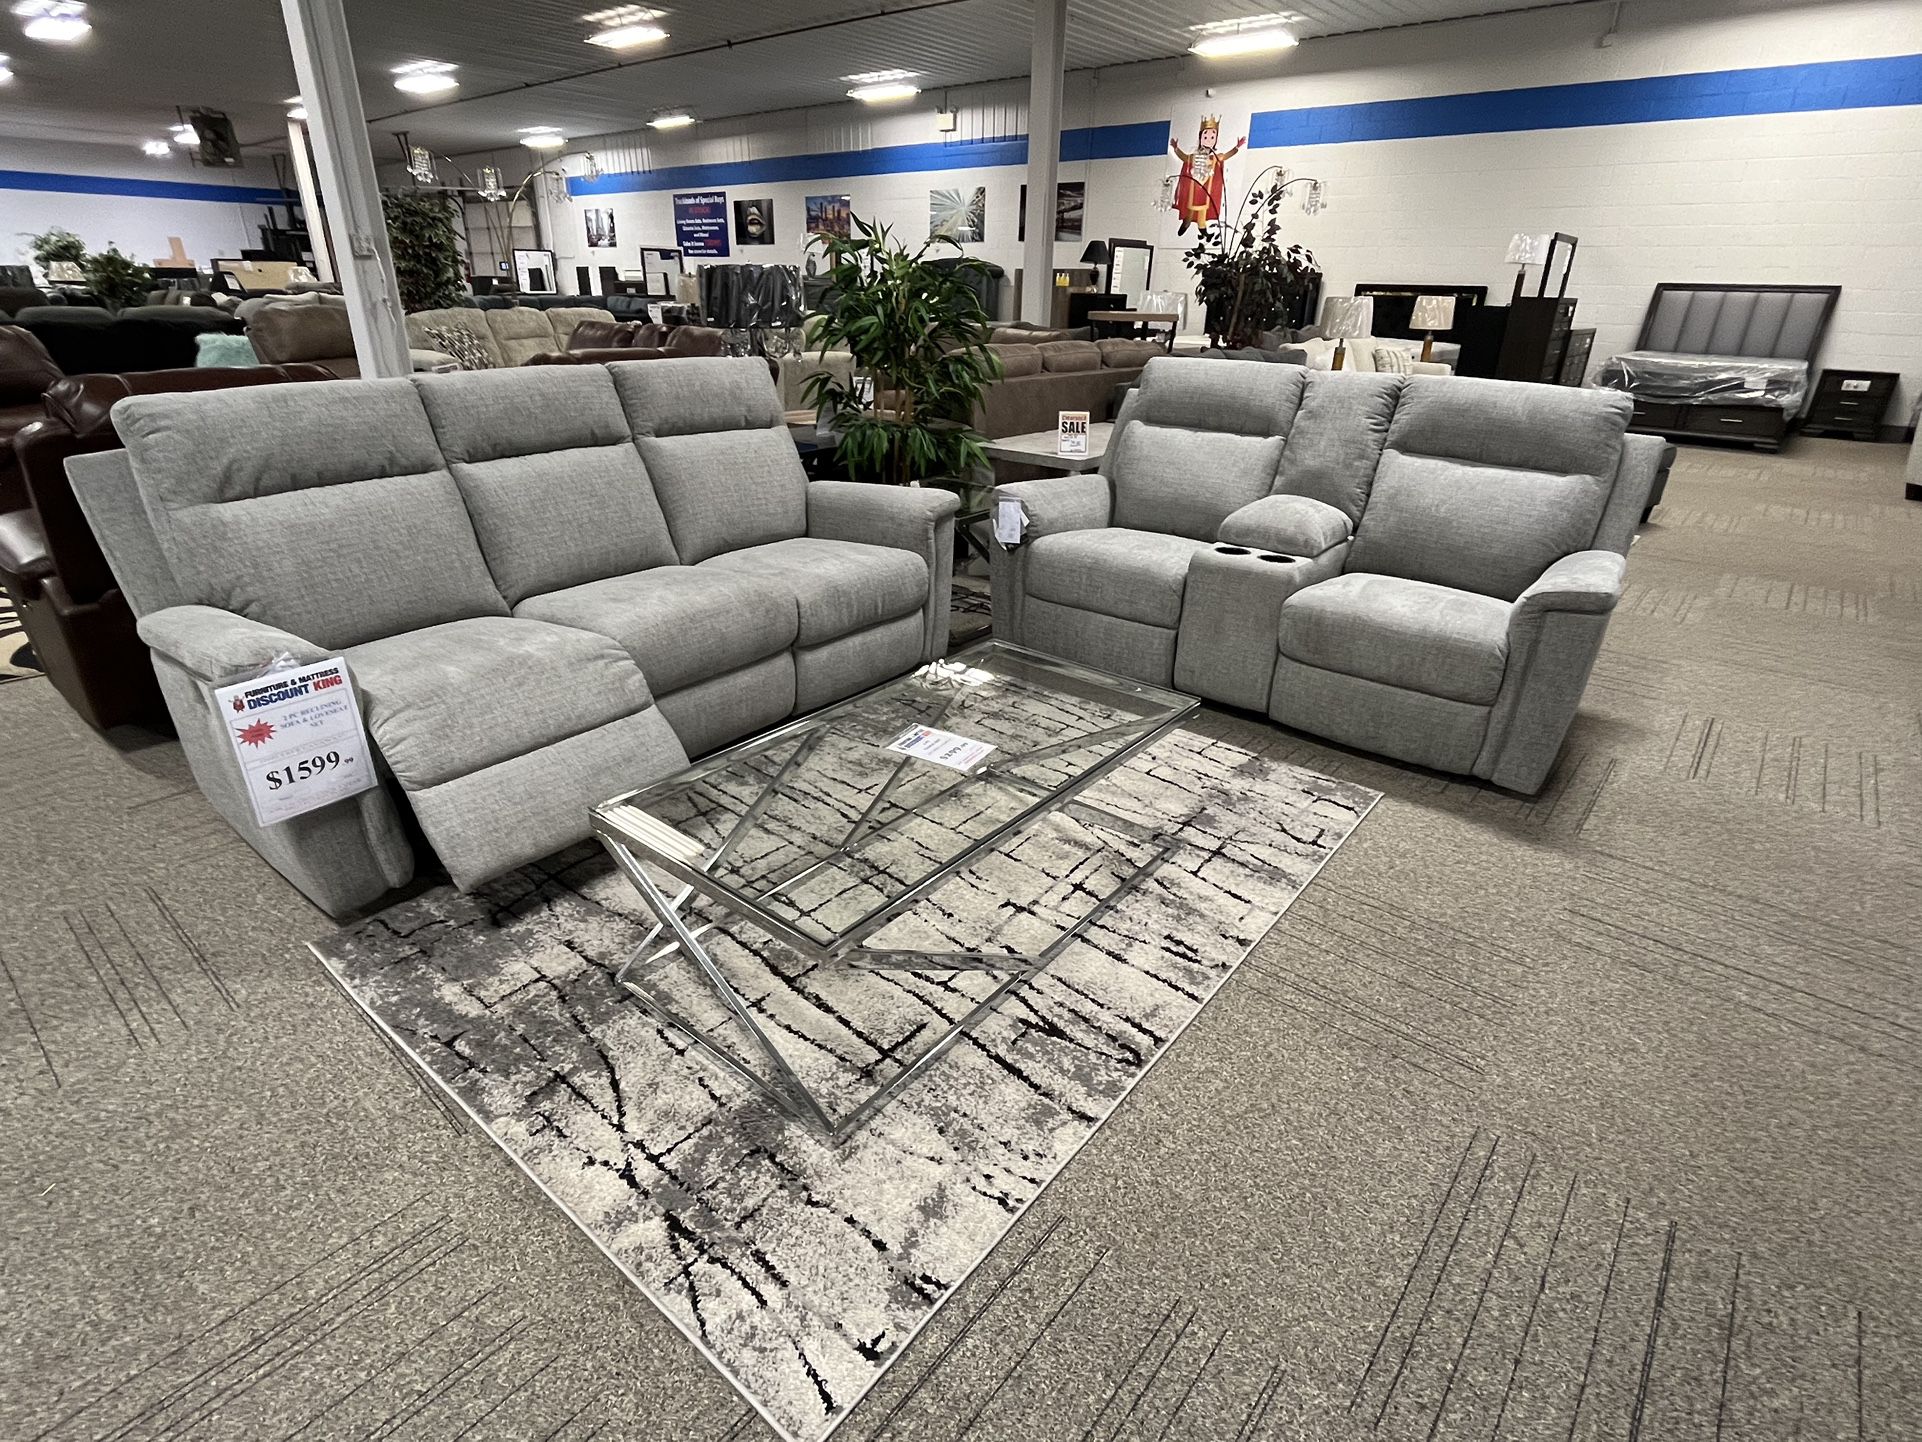 New Arrival!  Power Reclining Sofa And Loveseat Set!